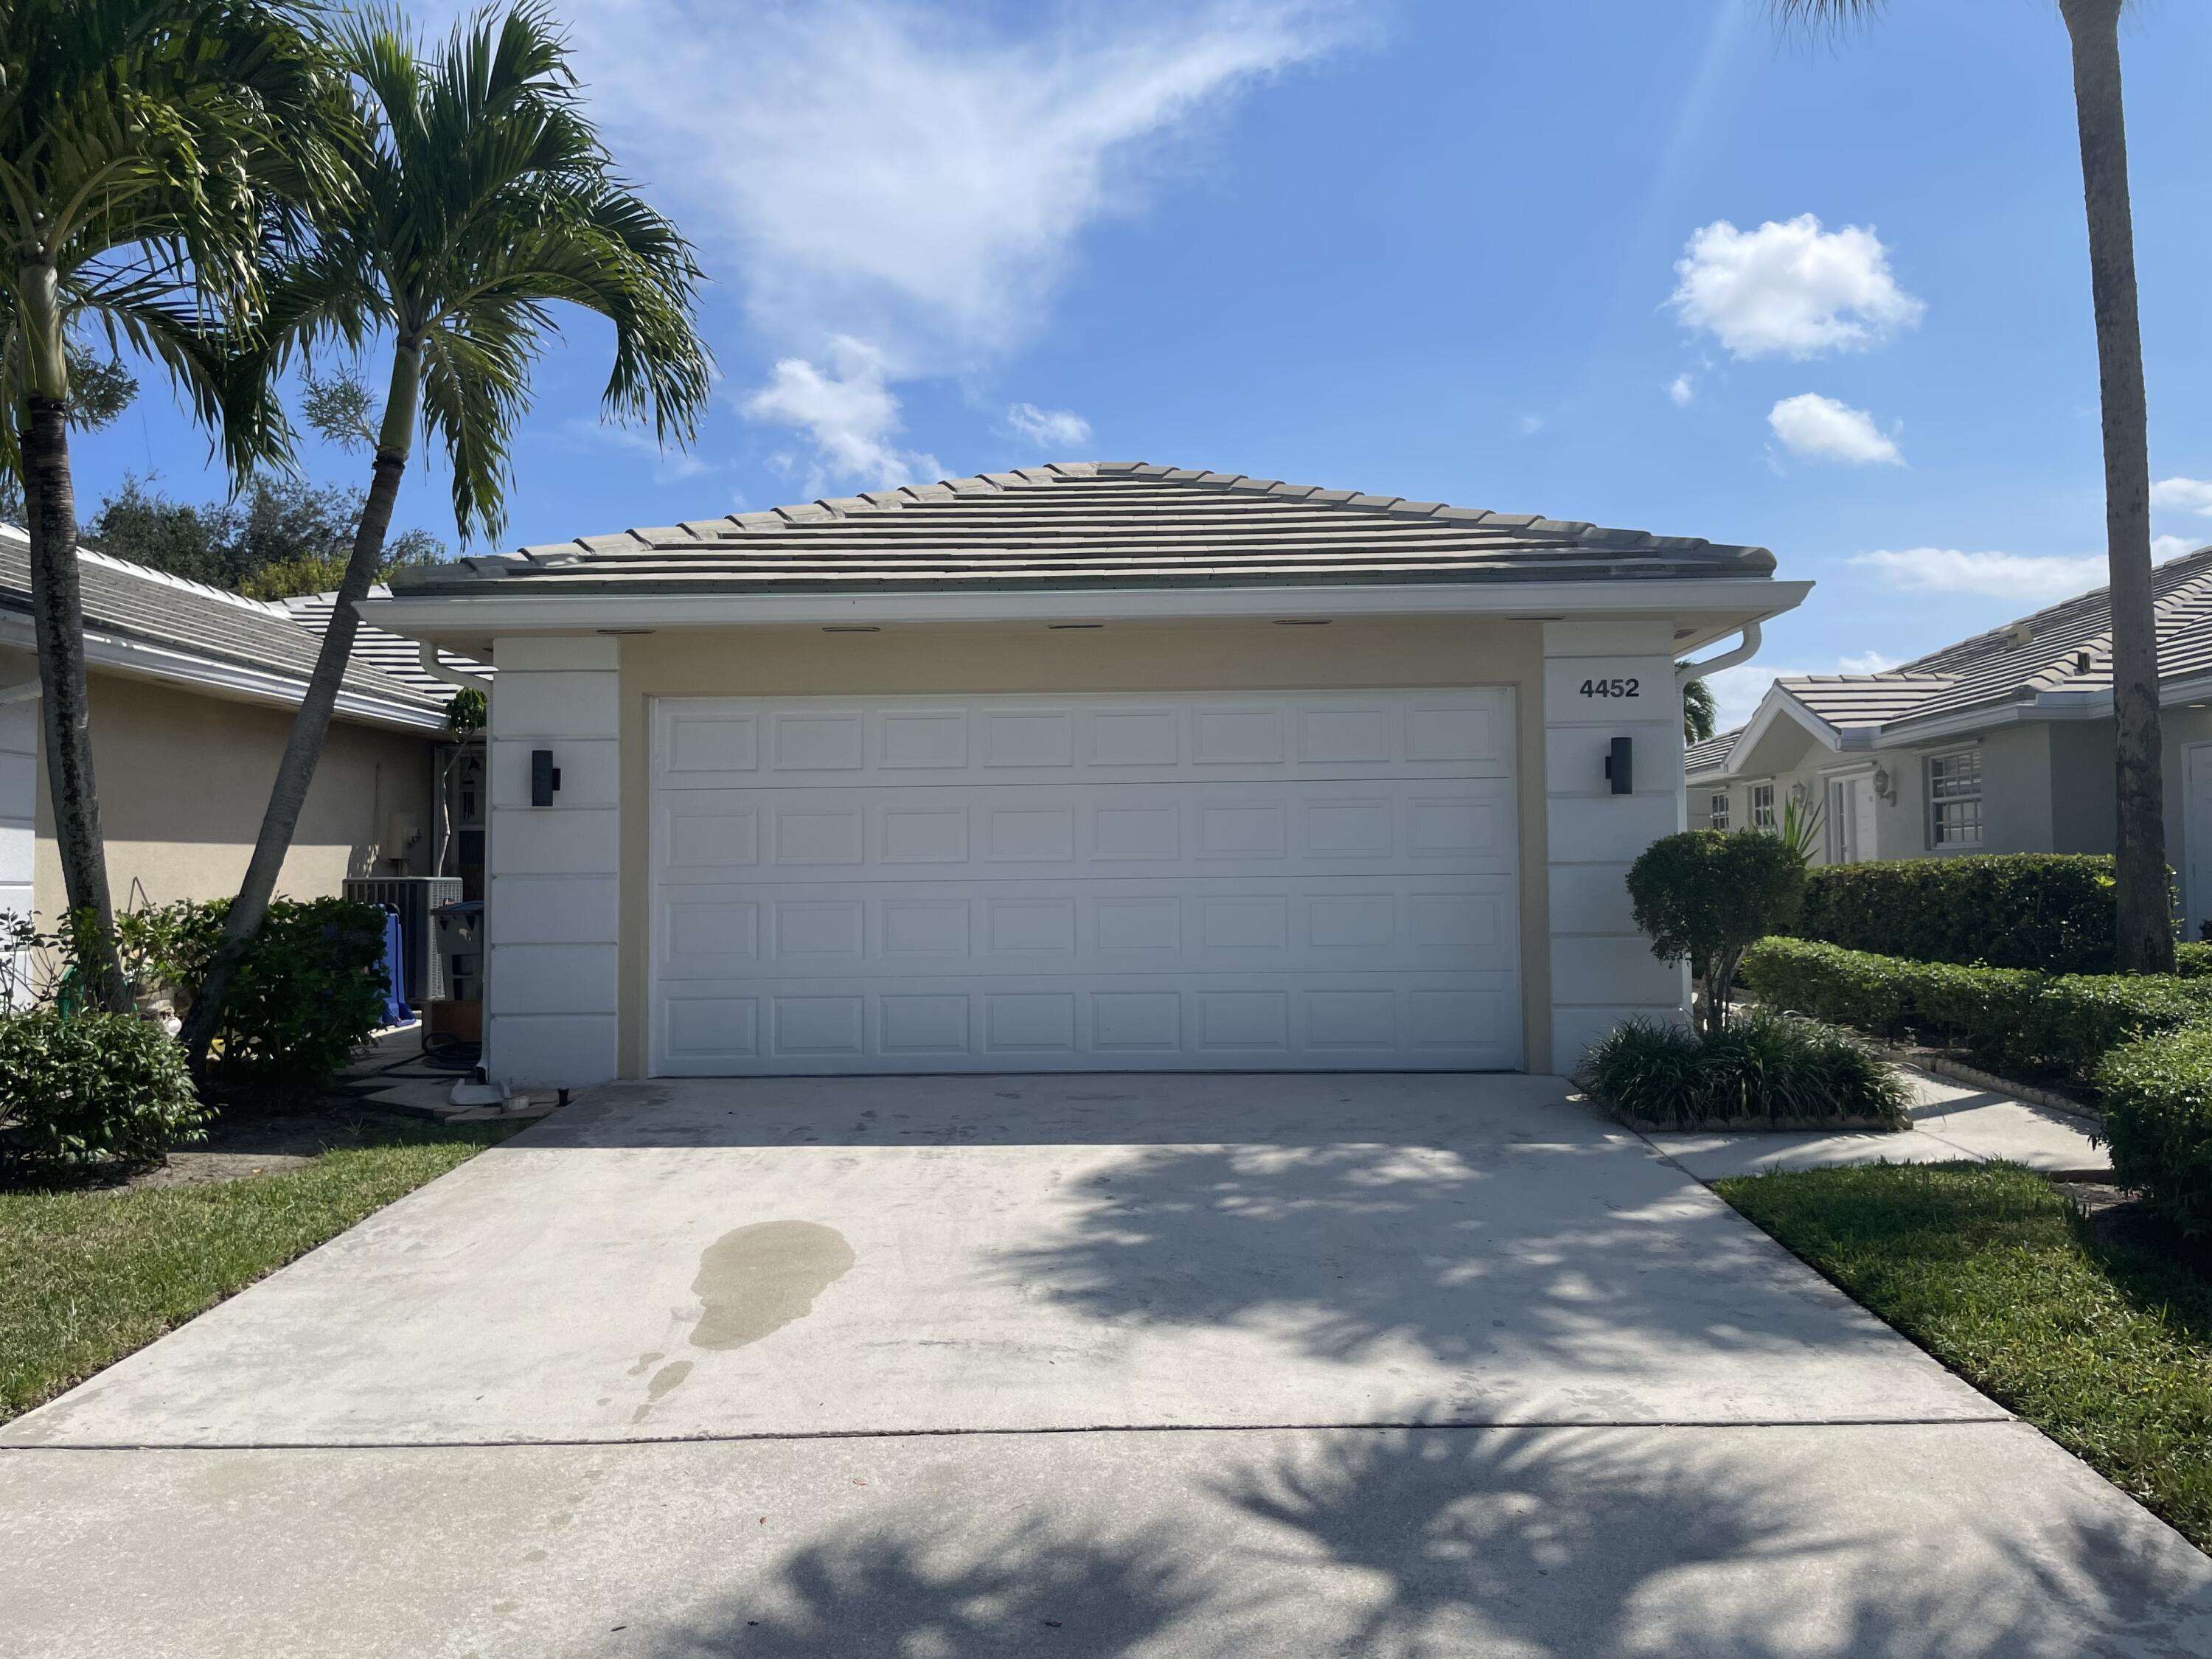 Homes for sale in Palm Beach Gardens | View 4452 Royal Fern Way | 2 Beds, 2 Baths